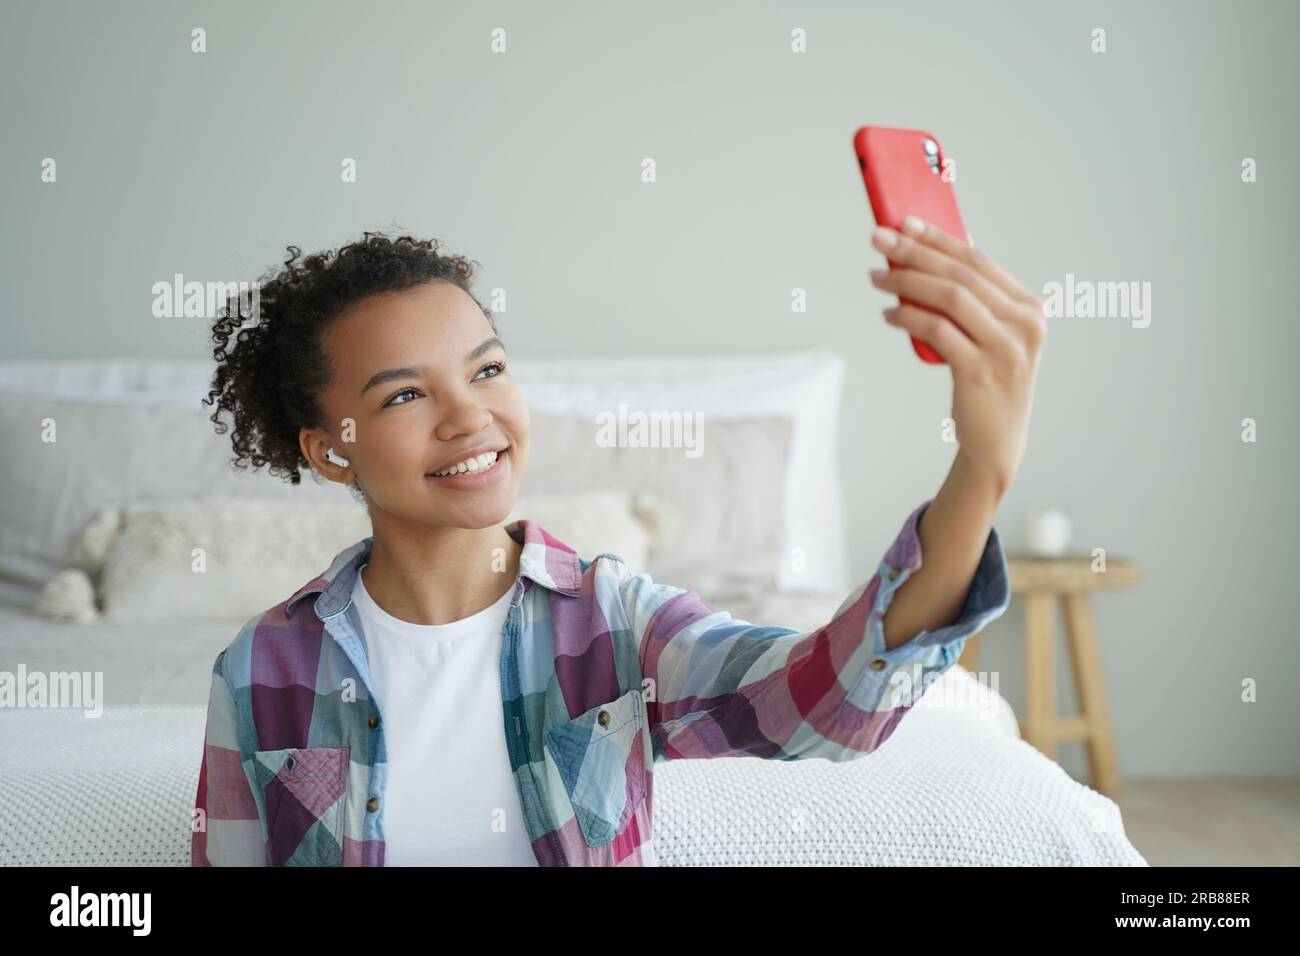 Biracial teen blogger chats online via phone video call, uses modern apps at home. Smiling girl takes selfie with smartphone. Stock Photo